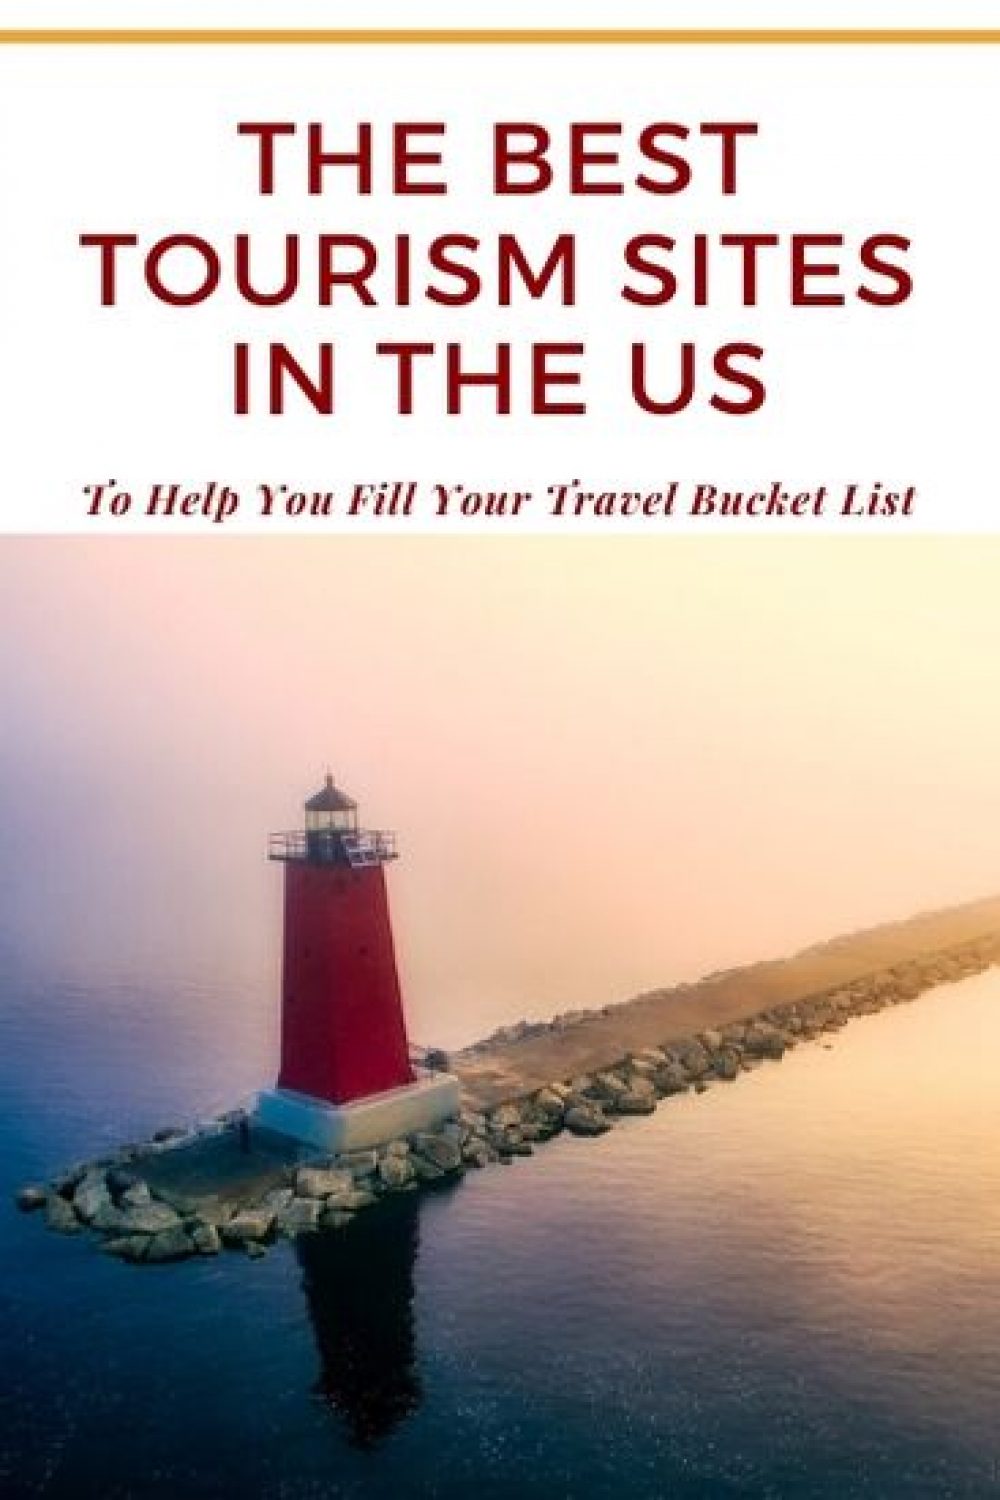 Fill your travel bucket list with ideas from the best tourism websites in the US. Find travel bucket list destinations in the US, travel destinations USA, travel bucket list ideas, and information on places to visit to satisfy your wanderlust. What USA travel destinations are on your USA bucket list? #us #usa #travel